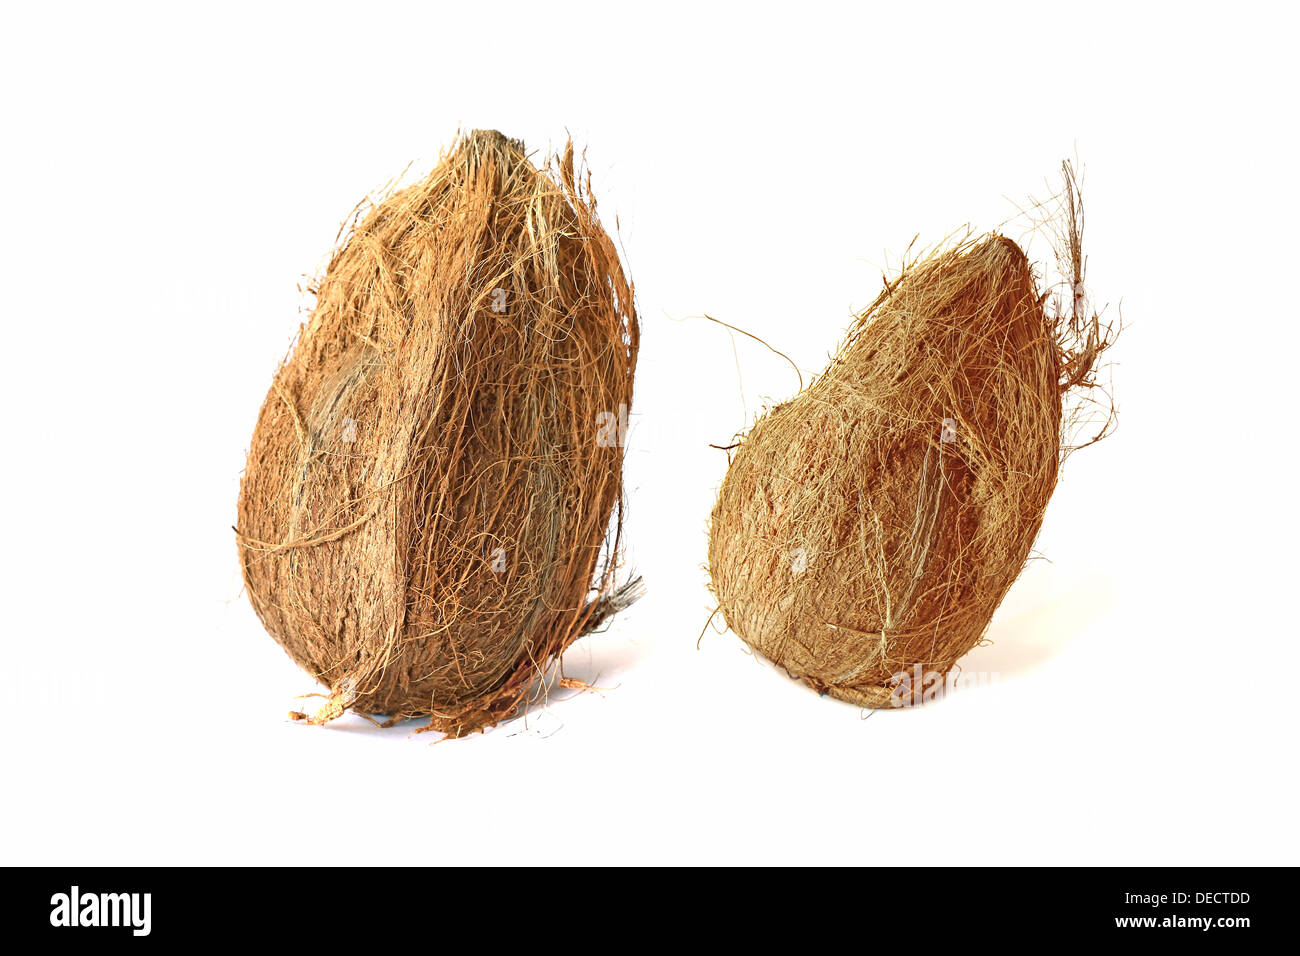 Two coconuts isolated on white backgrounds Stock Photo